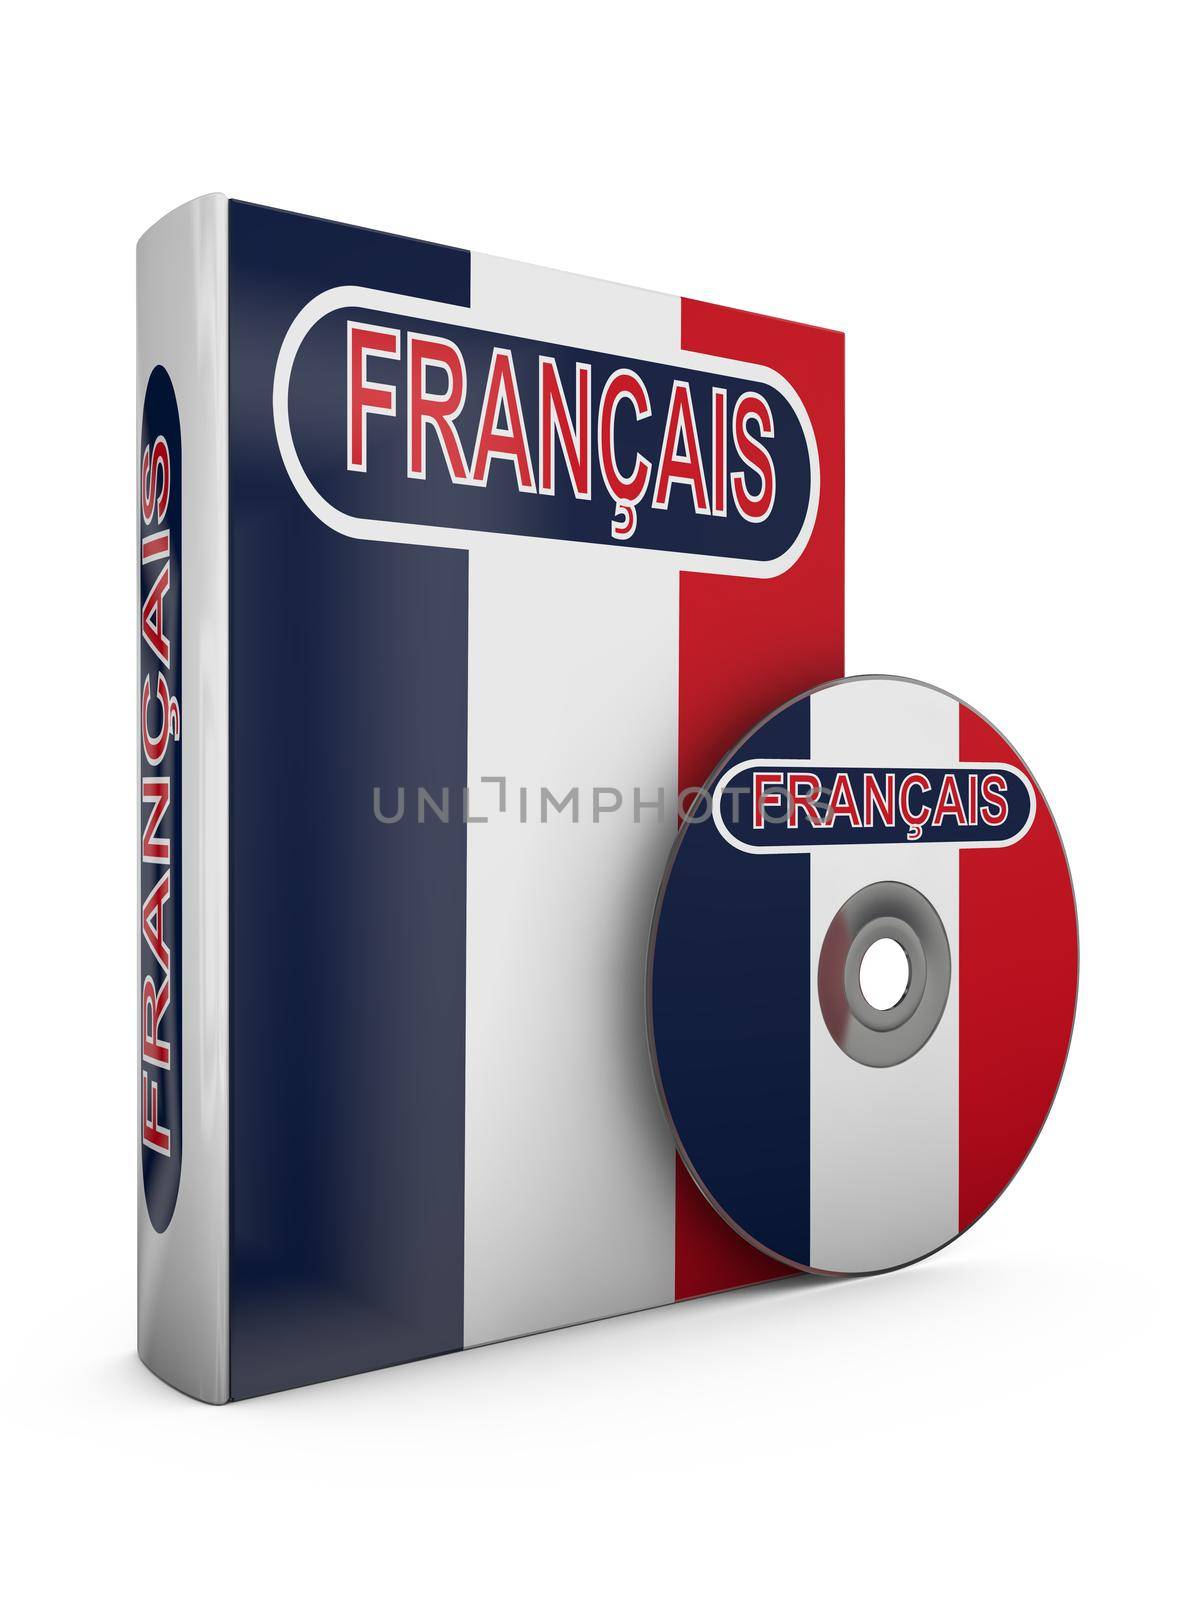 book and a CD with the image of the flag of France and the inscription - French